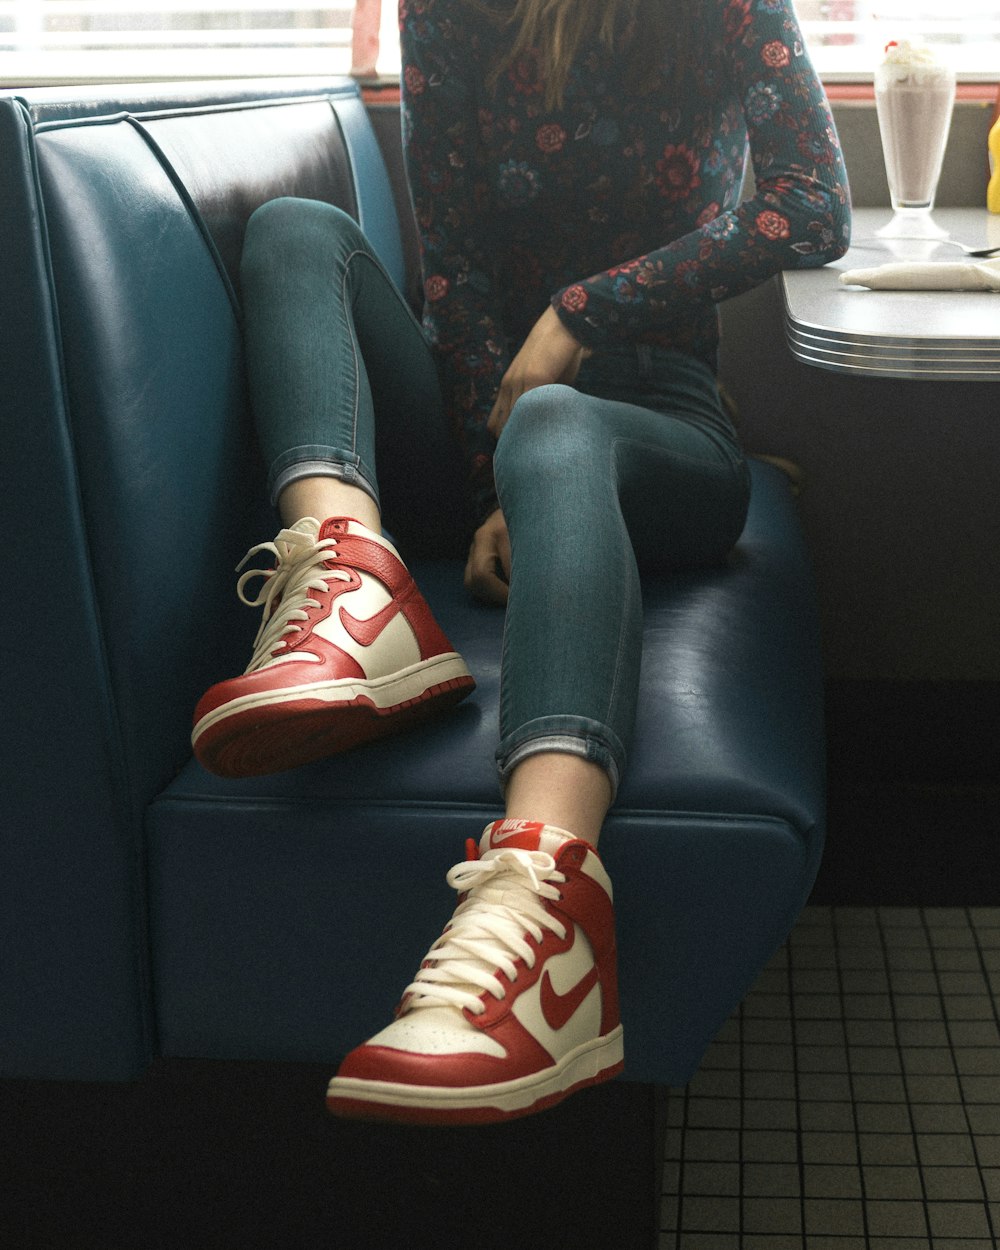 woman wearing red-and-white Nike mid-top sneakers while sitting on seat